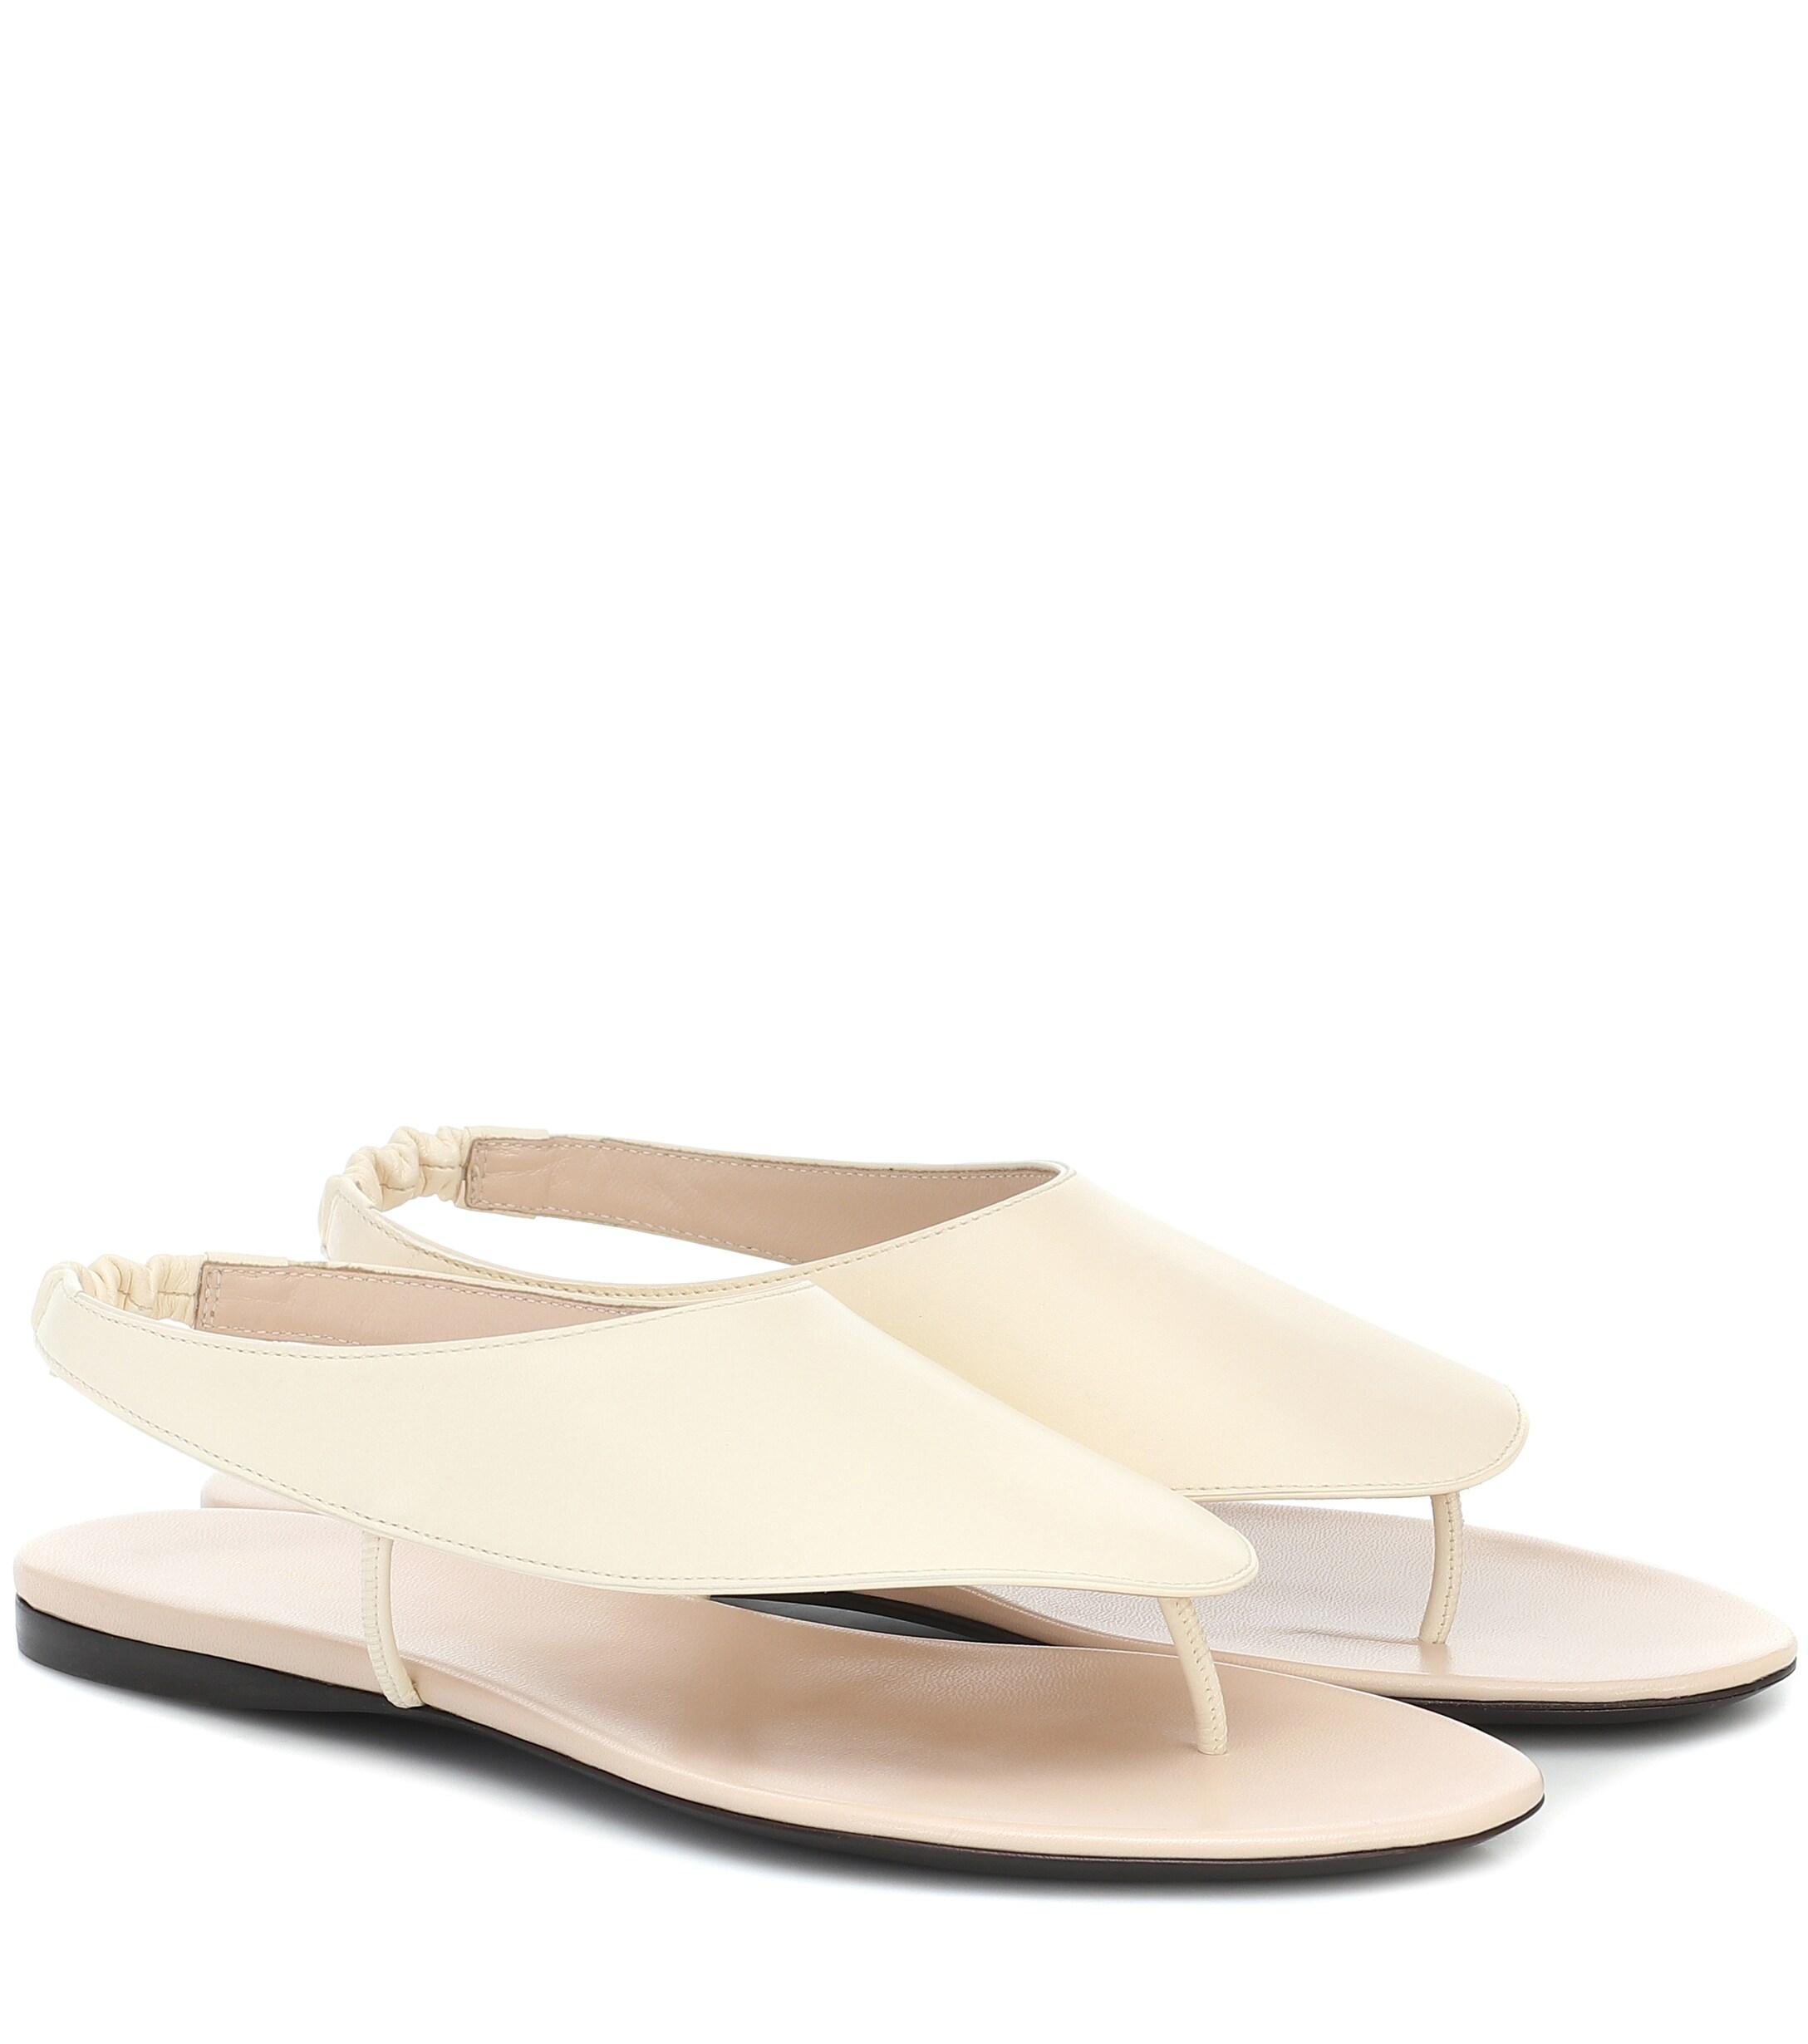 The Row Ravello Leather Thong Sandals in White - Lyst